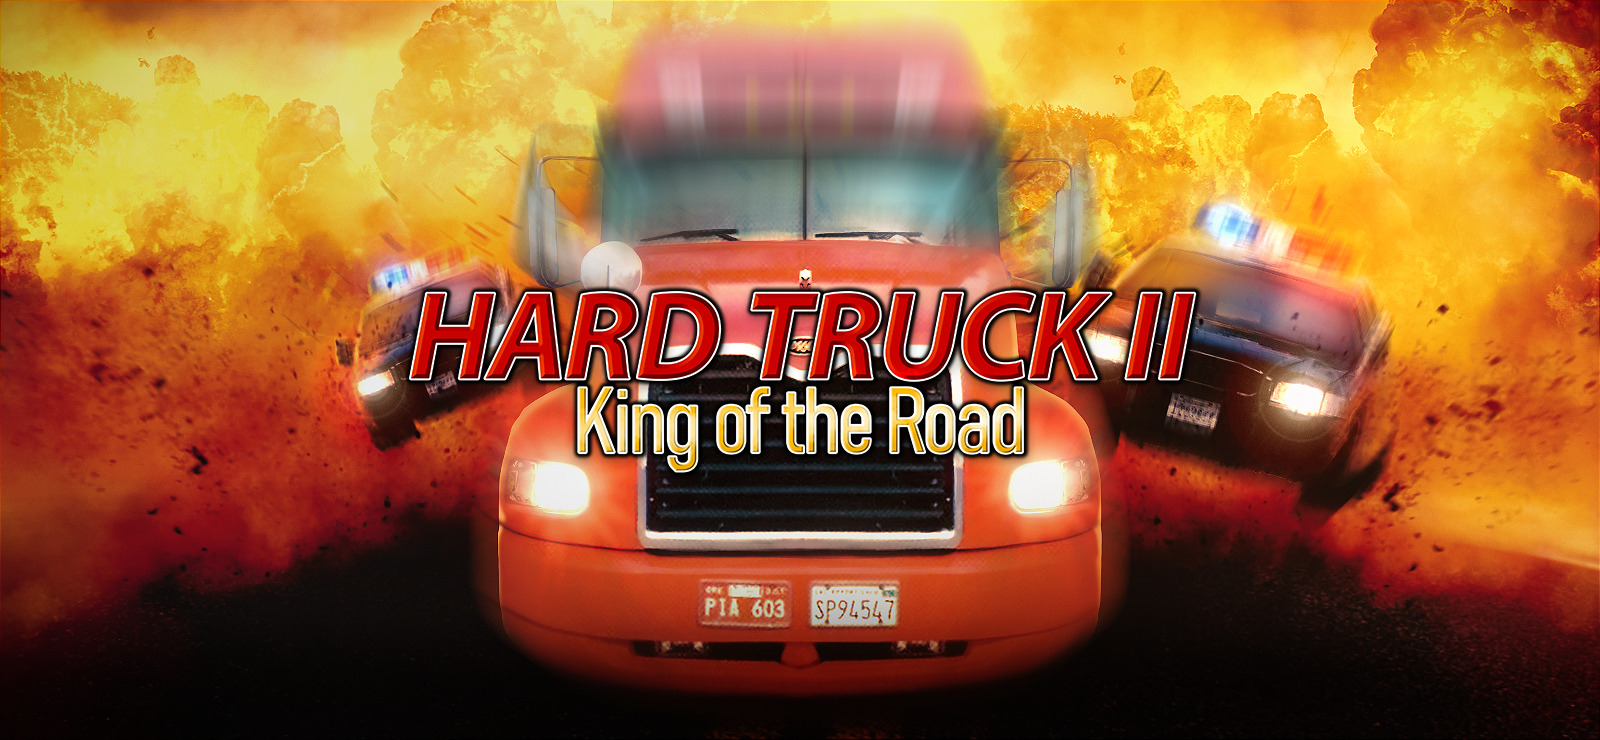 King of the Road - PC Review and Full Download